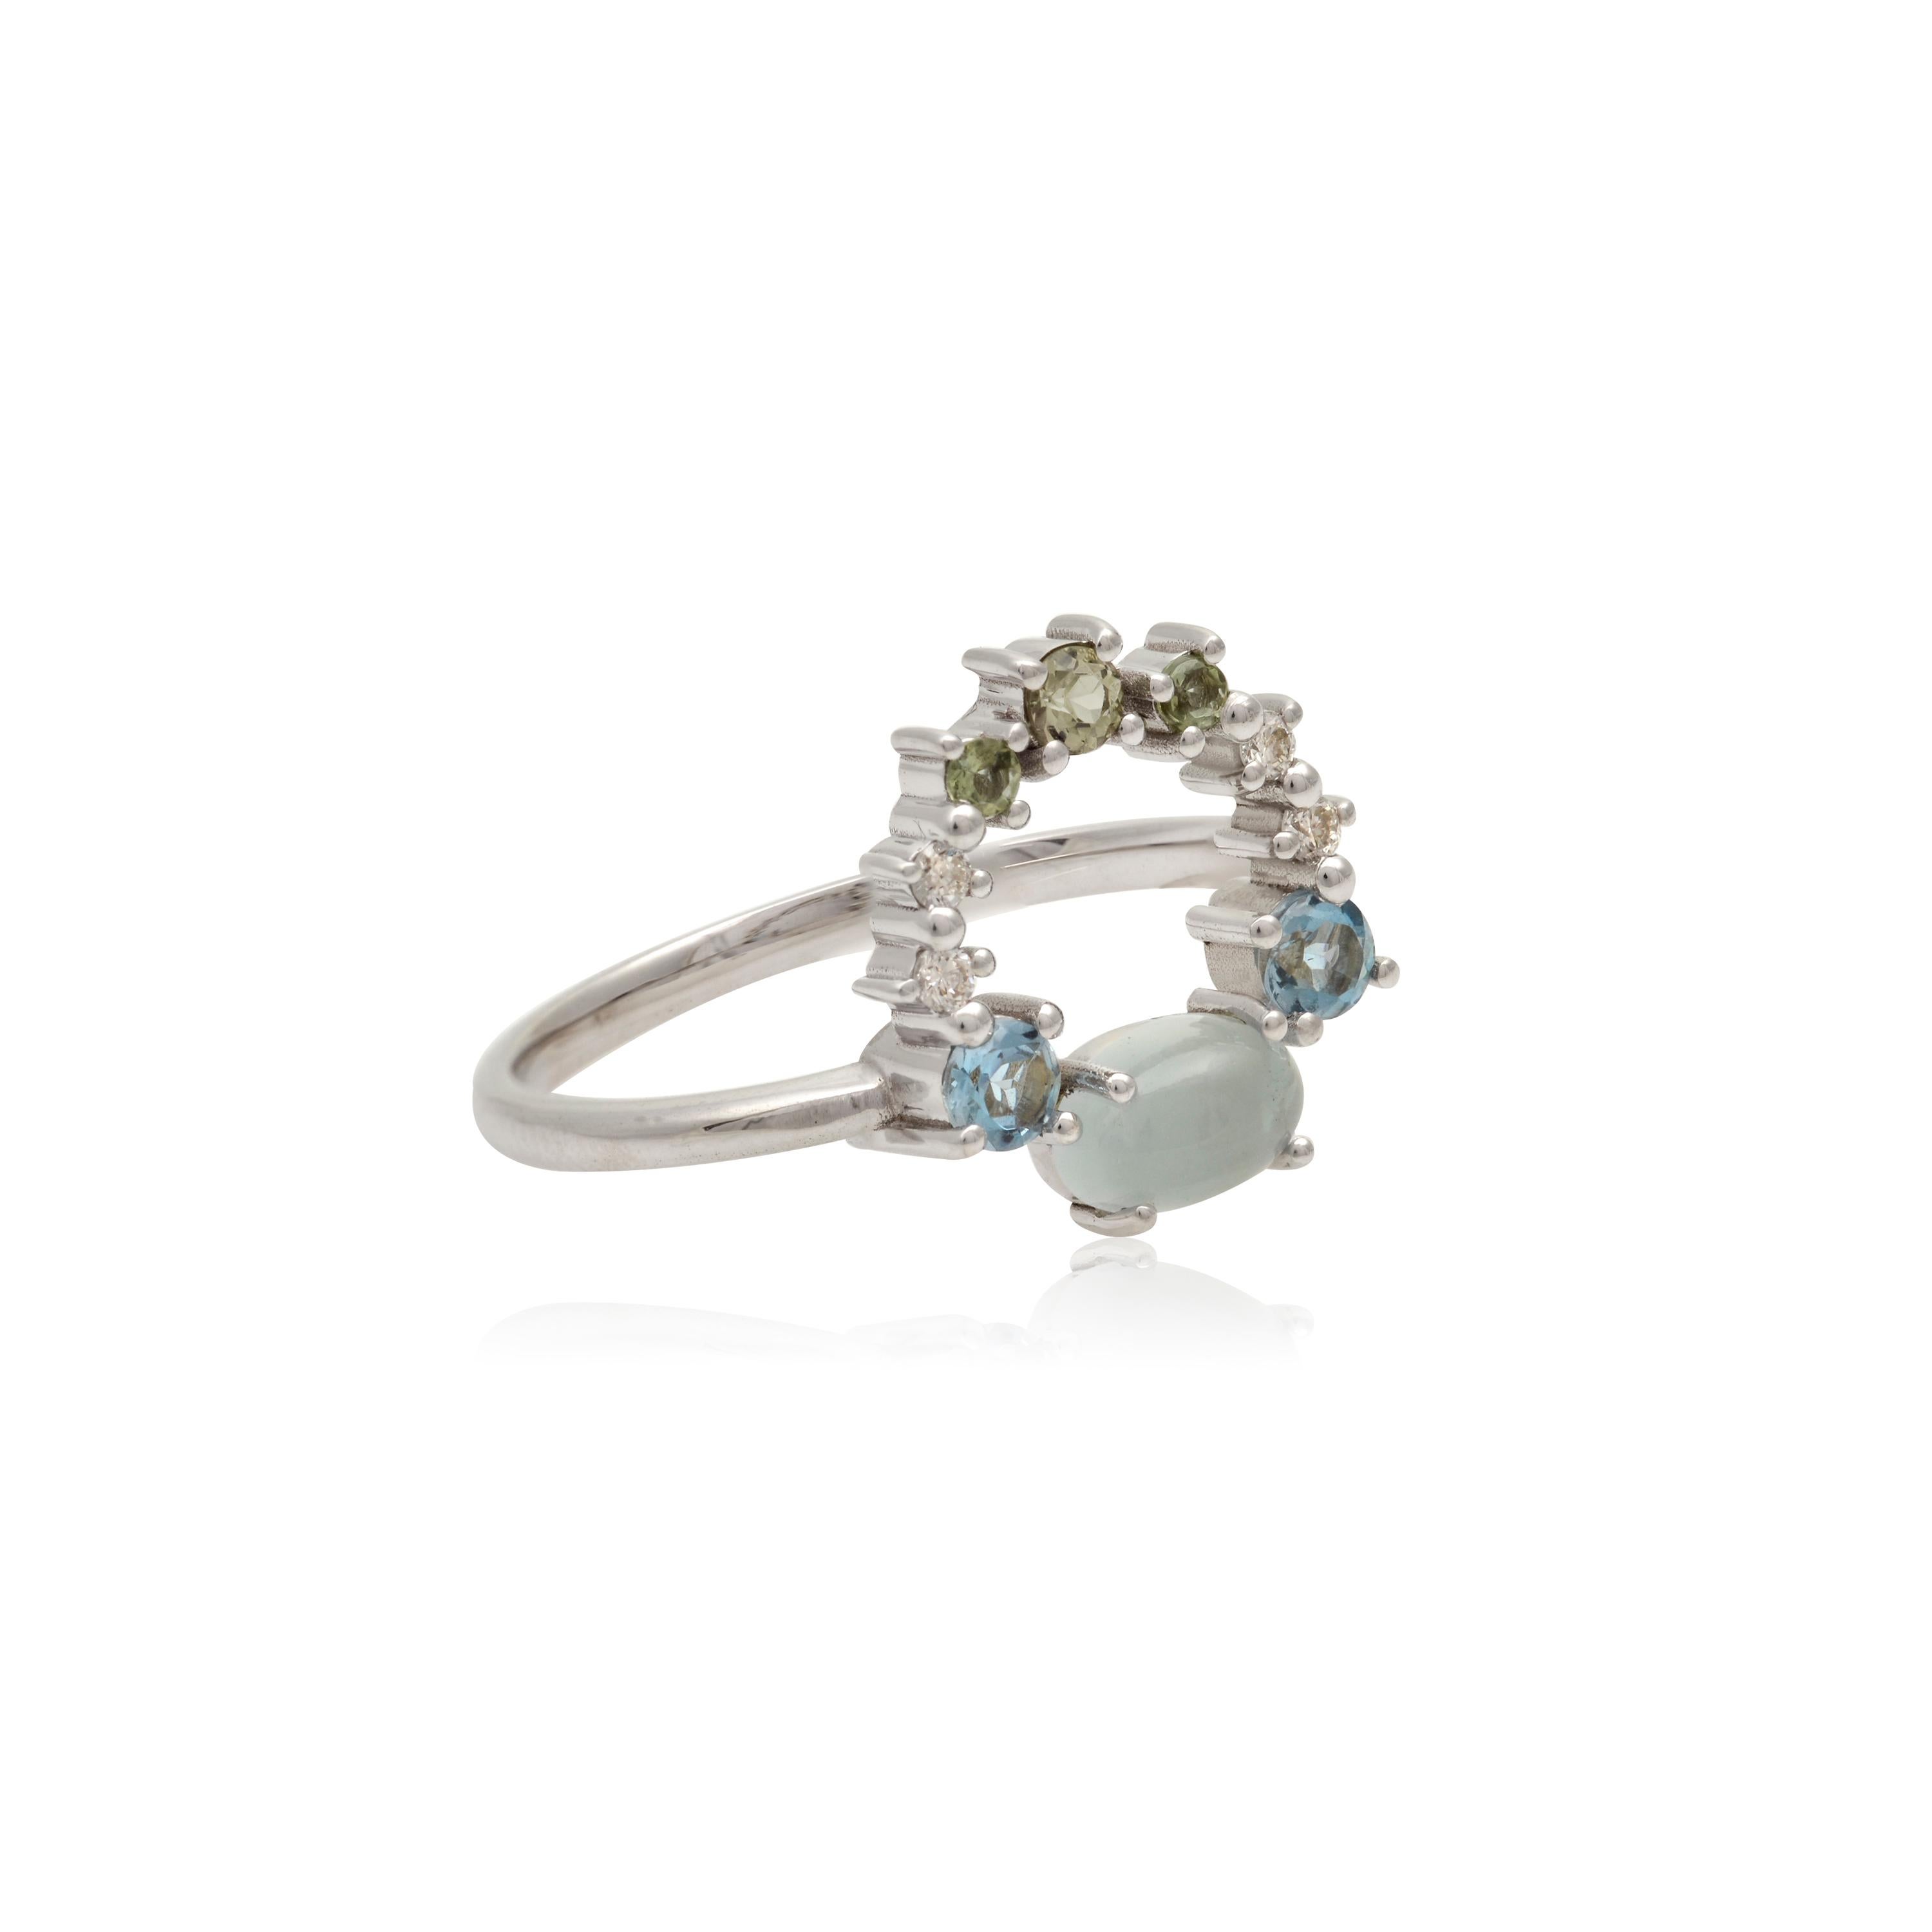 Designer: Alexia Gryllaki
Dimensions: L14x21mm
Ring Size UK P 1/2, US 8
Weight: approximately 3.1g 
Barcode: OFS008

Multi-stone ring in 18 karat white gold with an oval cabochon aquamarine approx. 0.60cts, round faceted aquamarines approx. 0.18cts,